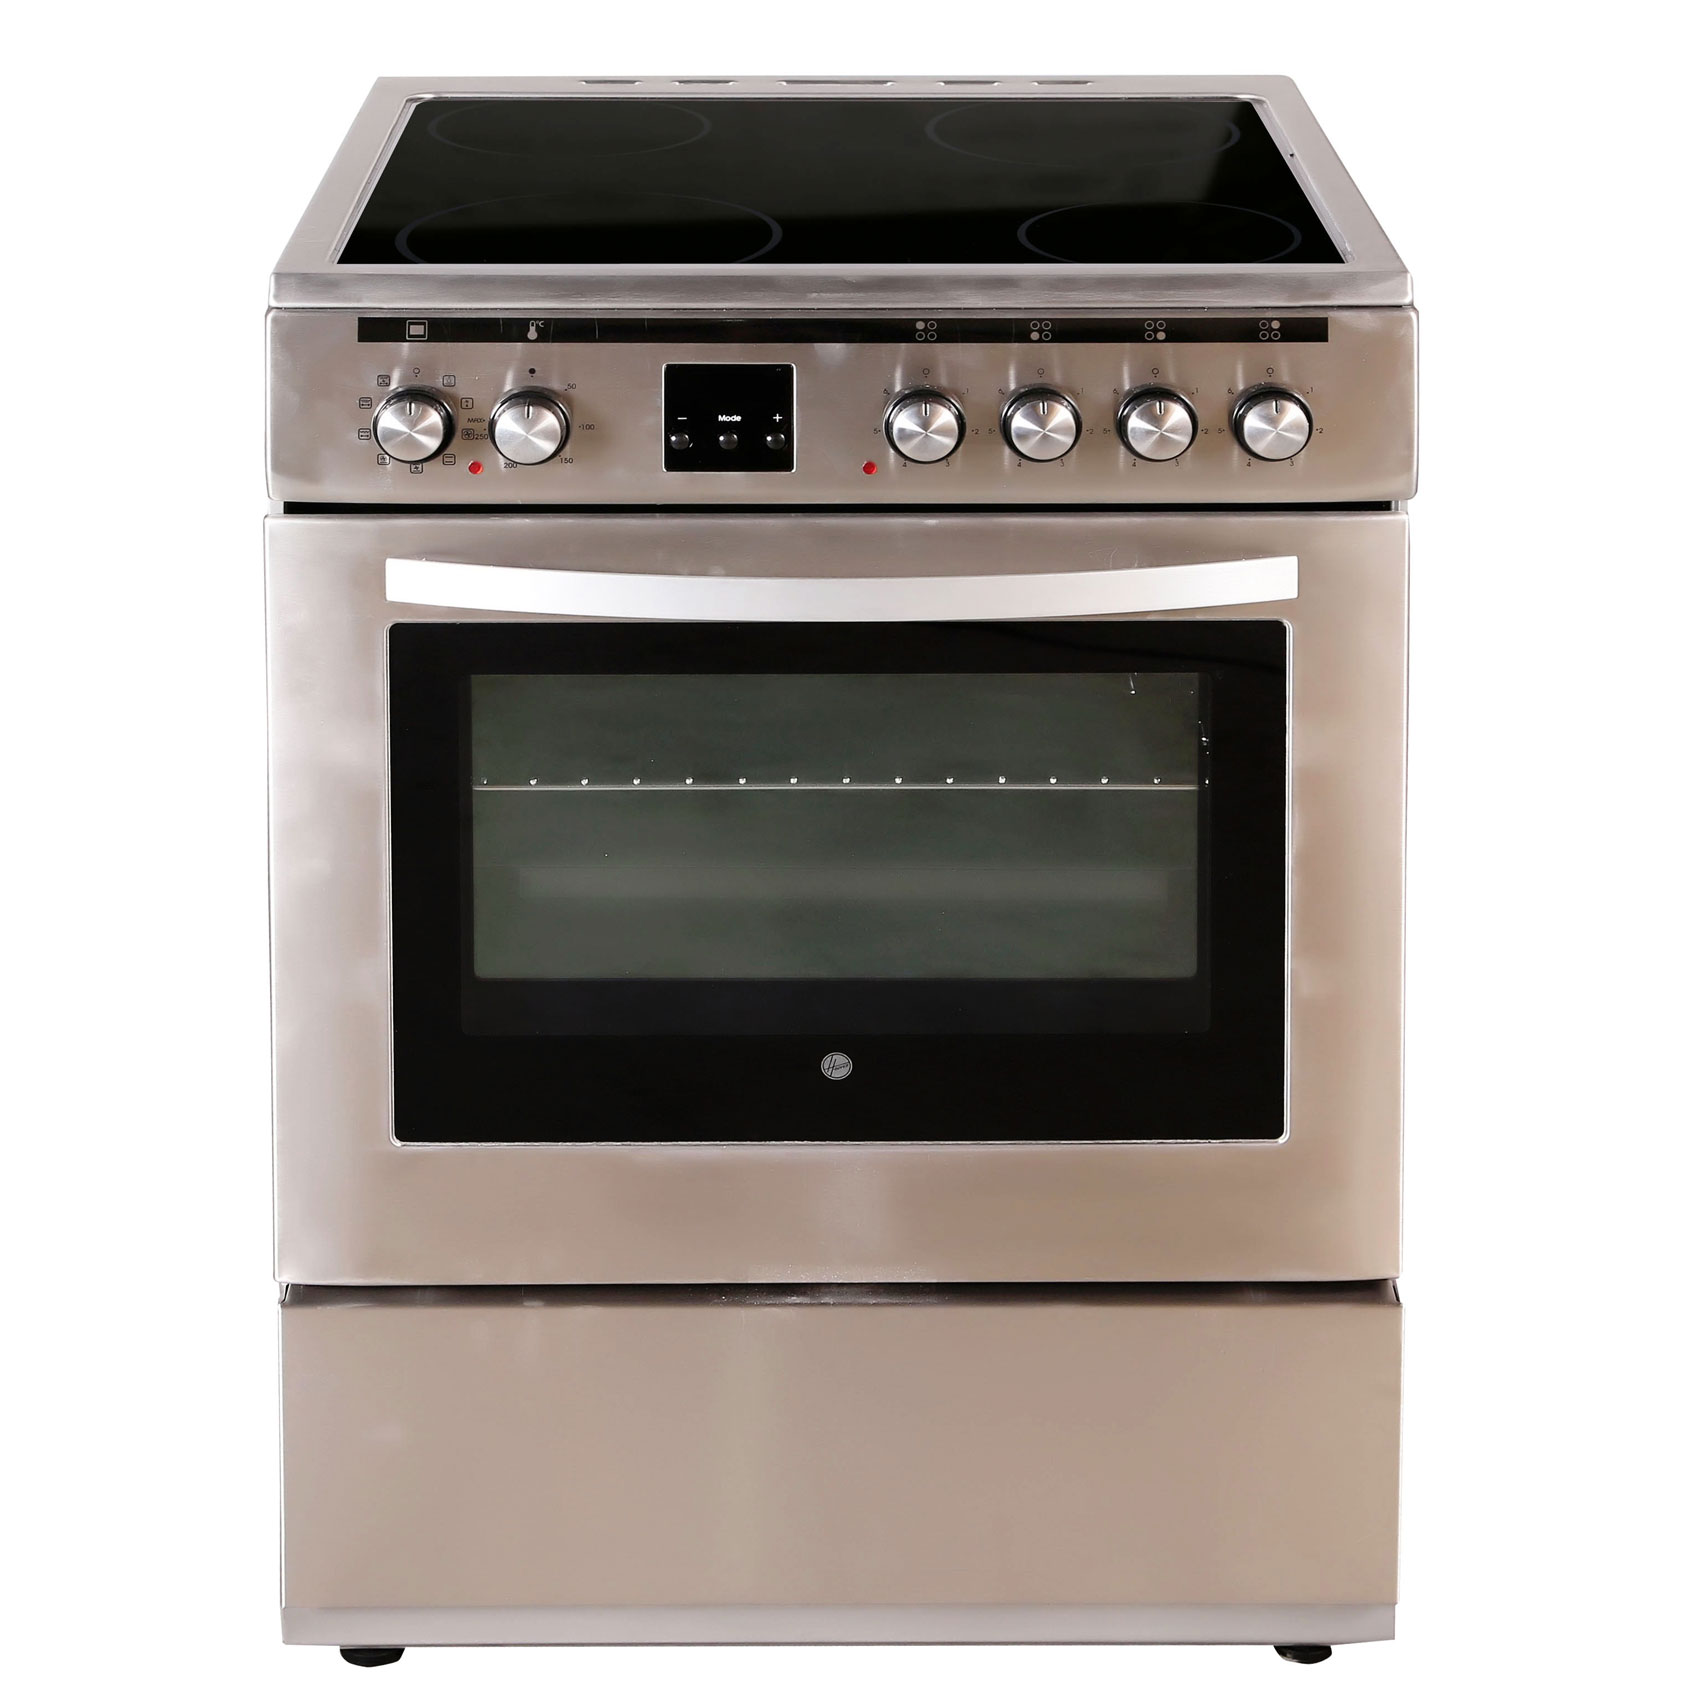 Hoover 4 Ceramic Zone Free Standing Electric Cooker Silver 60x60cm